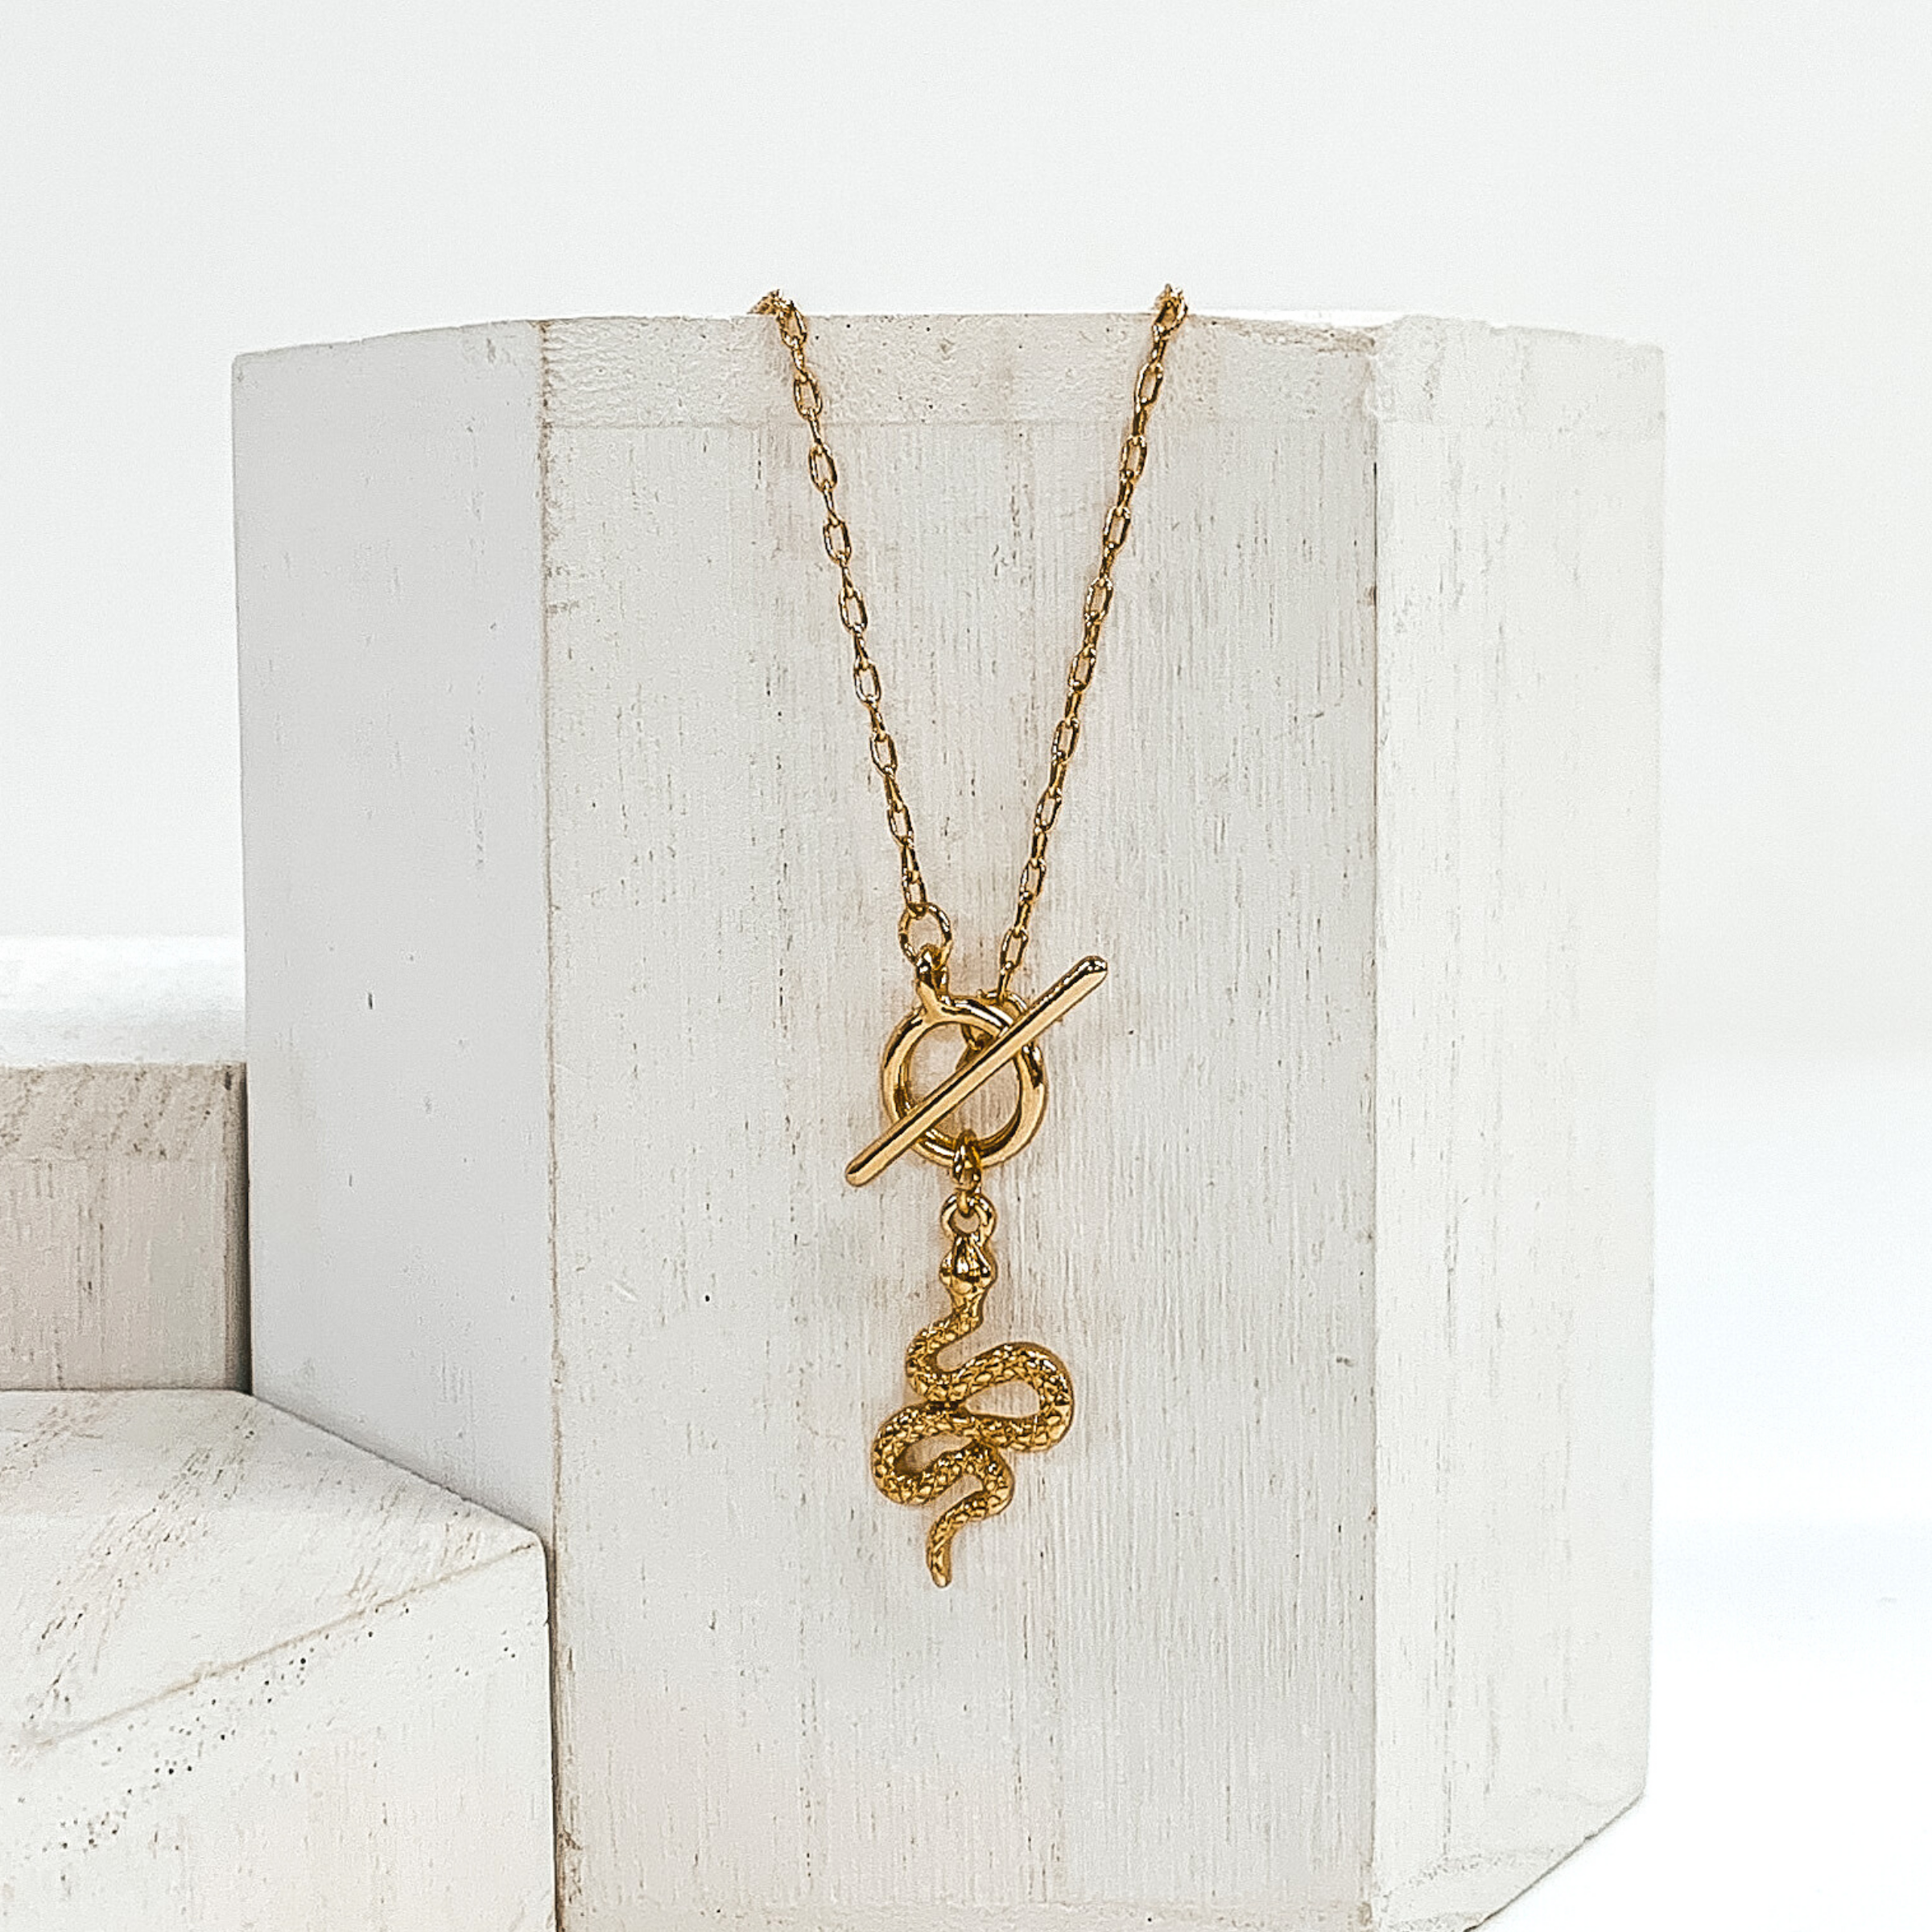 This is a gold necklace that has a front toggle clasp and a gold snake charm. This necklace is pictured laying on a white block and on a white background with other white blocks around it.